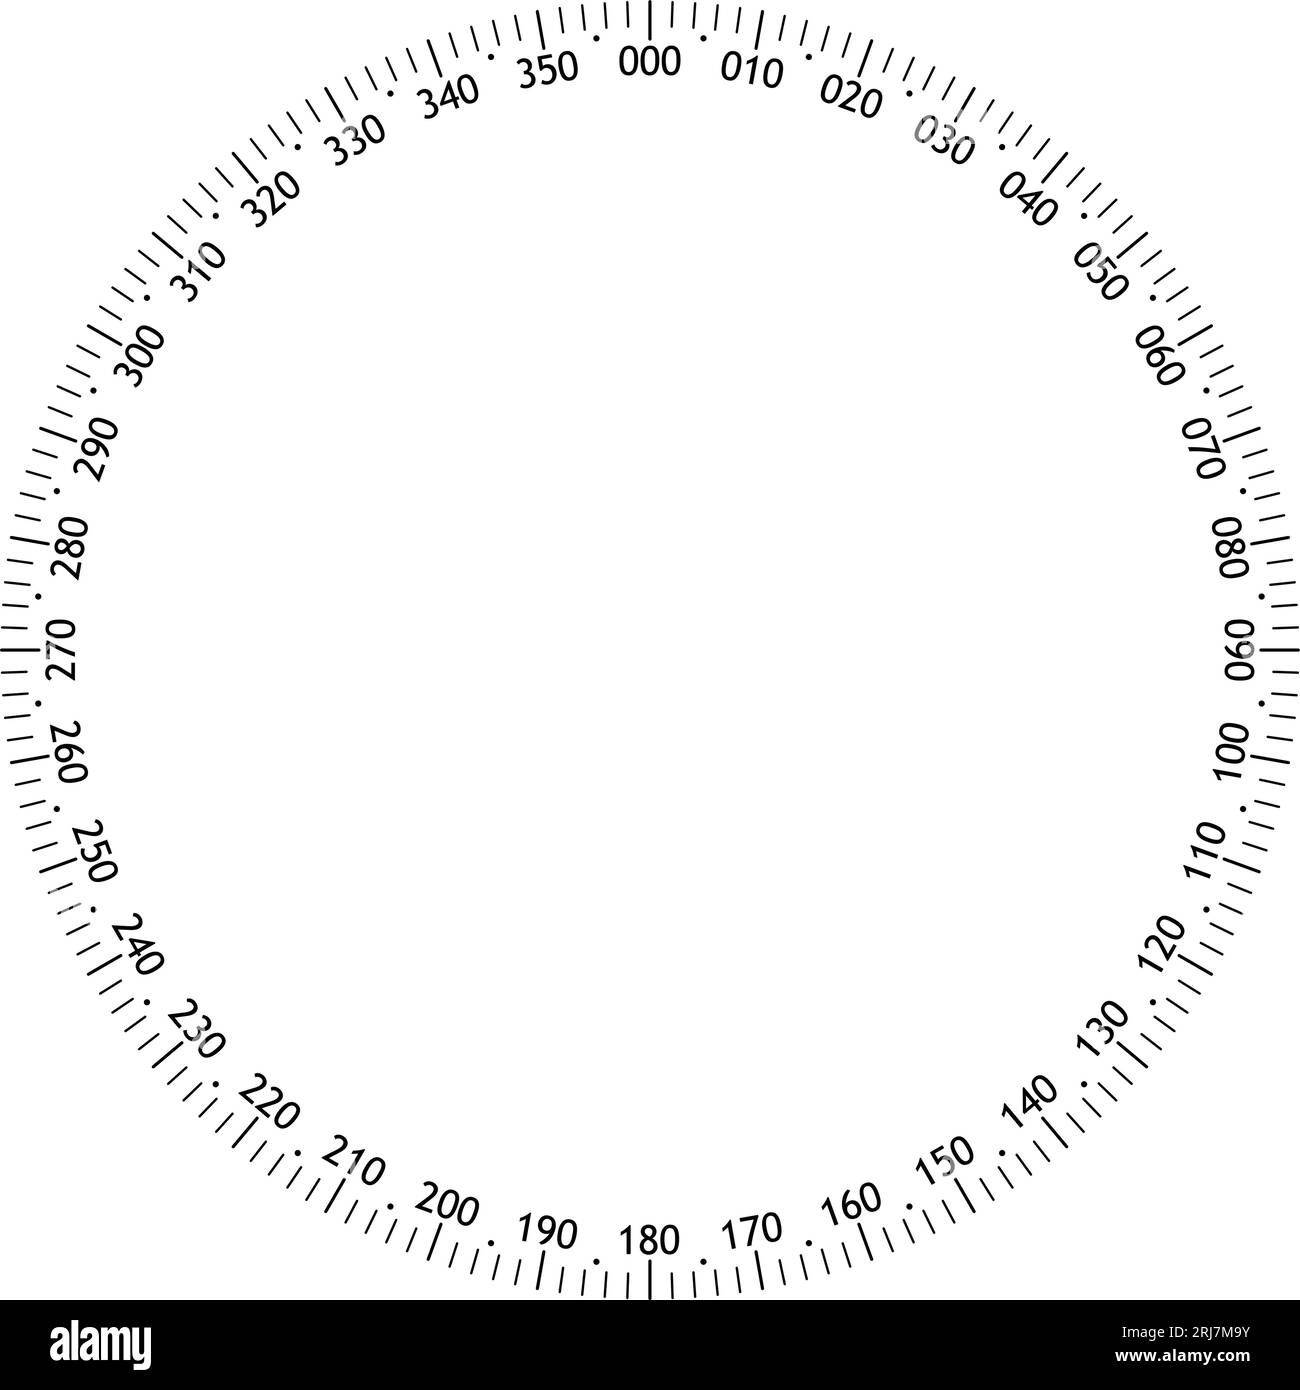 Math compass Black and White Stock Photos & Images - Alamy